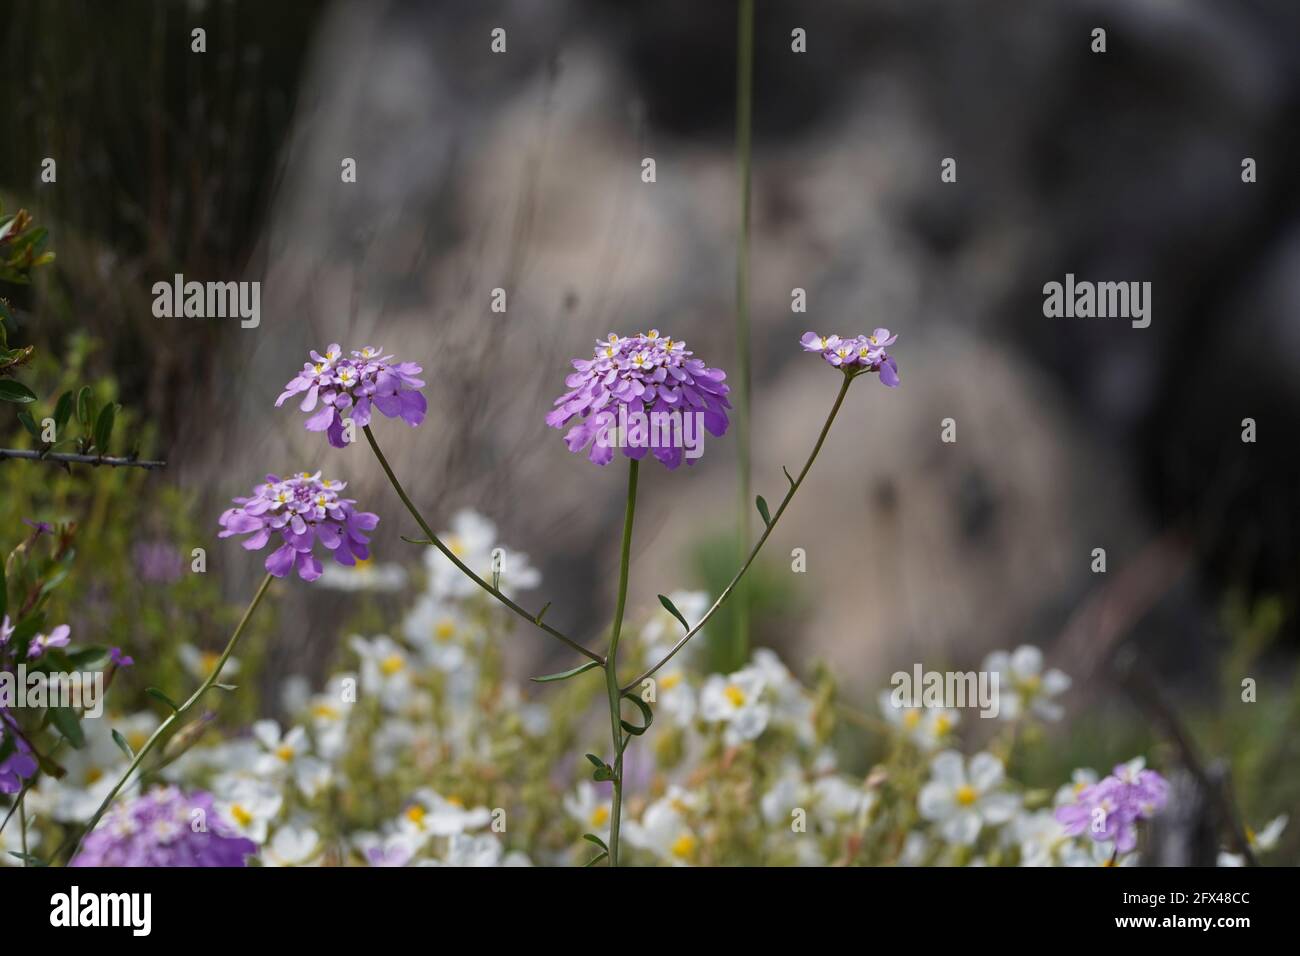 Iberis nazarita, Candytuft plant wildflower growing in the wild, Andalucia, Spain. Stock Photo